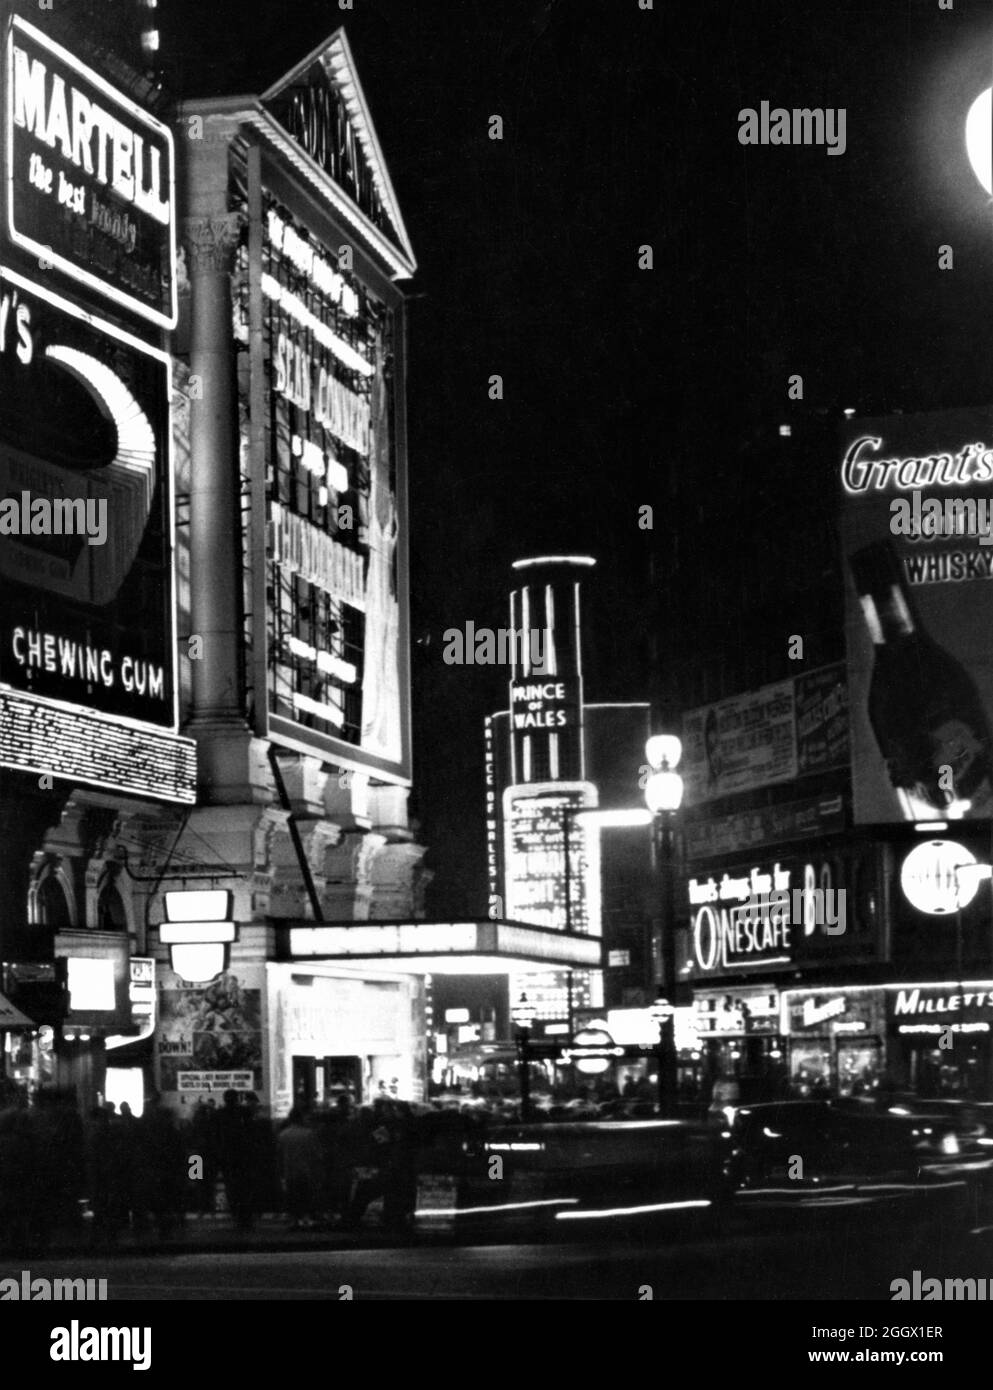 LONDON PAVILION cinema on Piccadilly Circus, London in early 1966 when it was presenting SEAN CONNERY as James Bond 007 in THUNDERBALL 1965 director TERENCE YOUNG producers Harry Saltzman and Albert R. Broccoli Eon Productions / United Artists Stock Photo